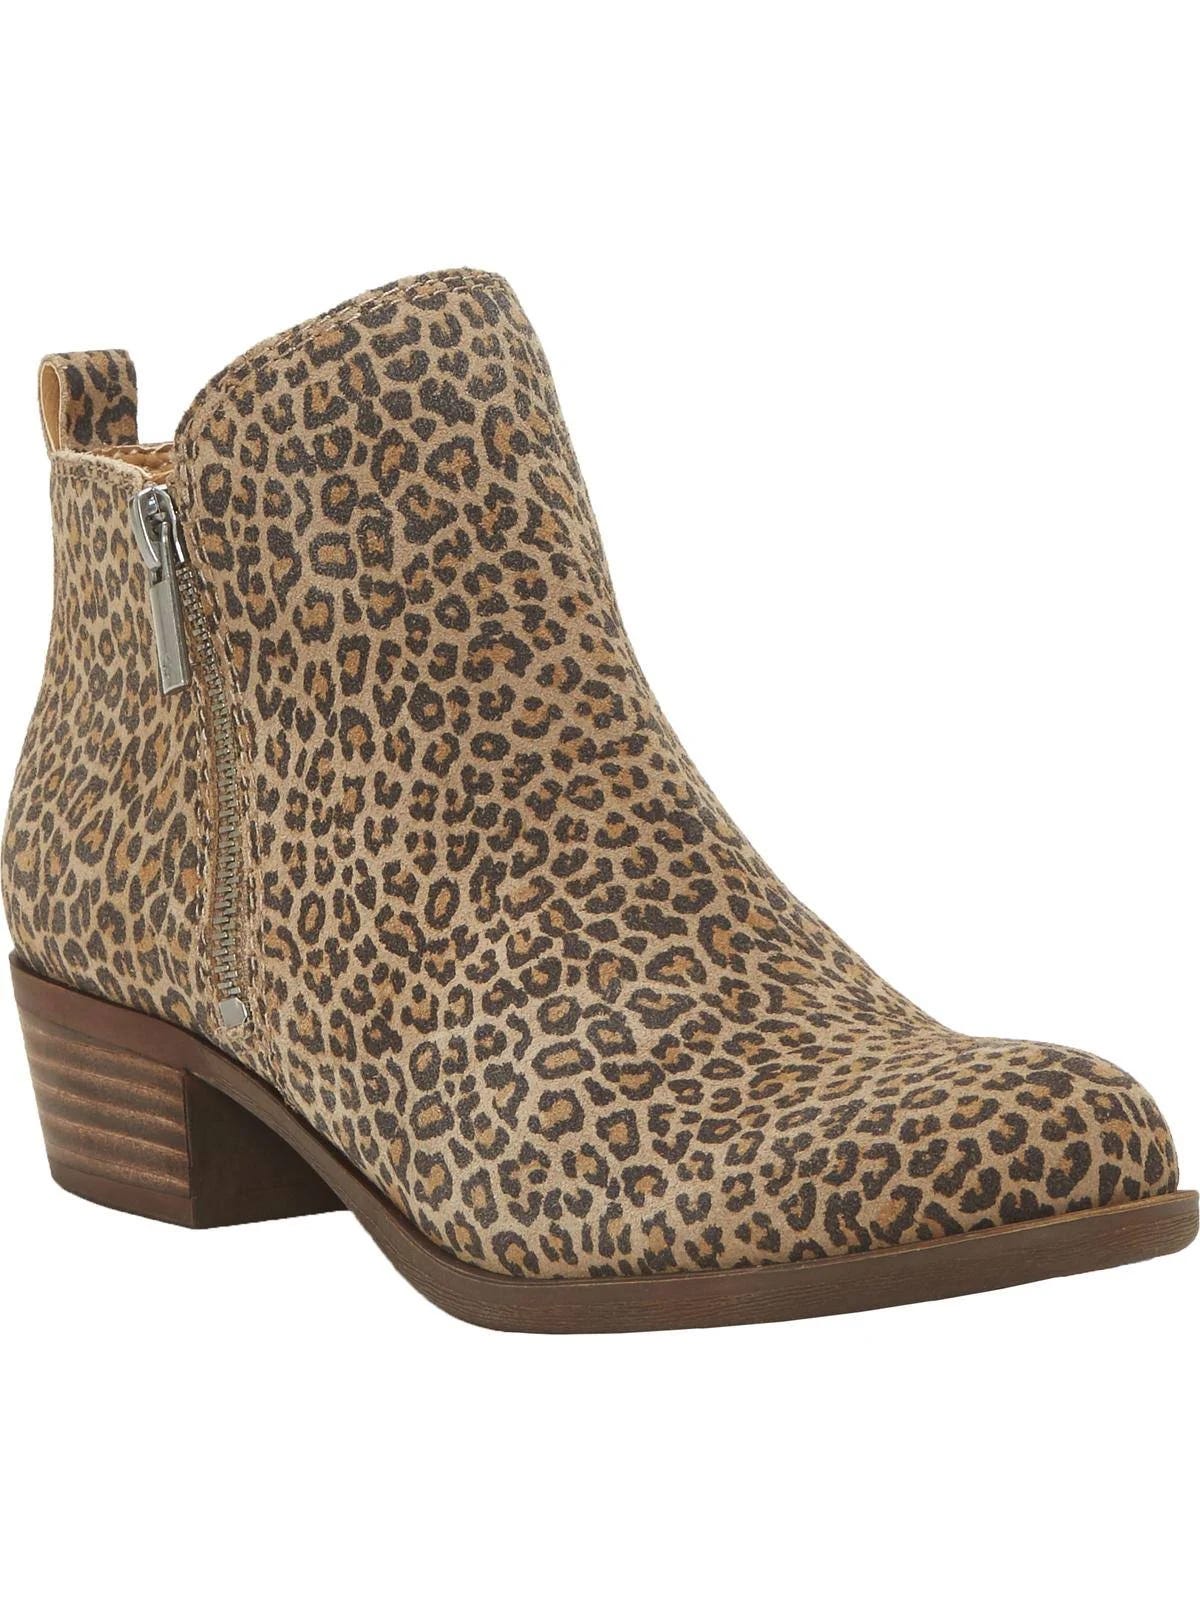 Lucky Brand Basel 9 Women's Stylish Ankle Bootie with Suede Upper | Image